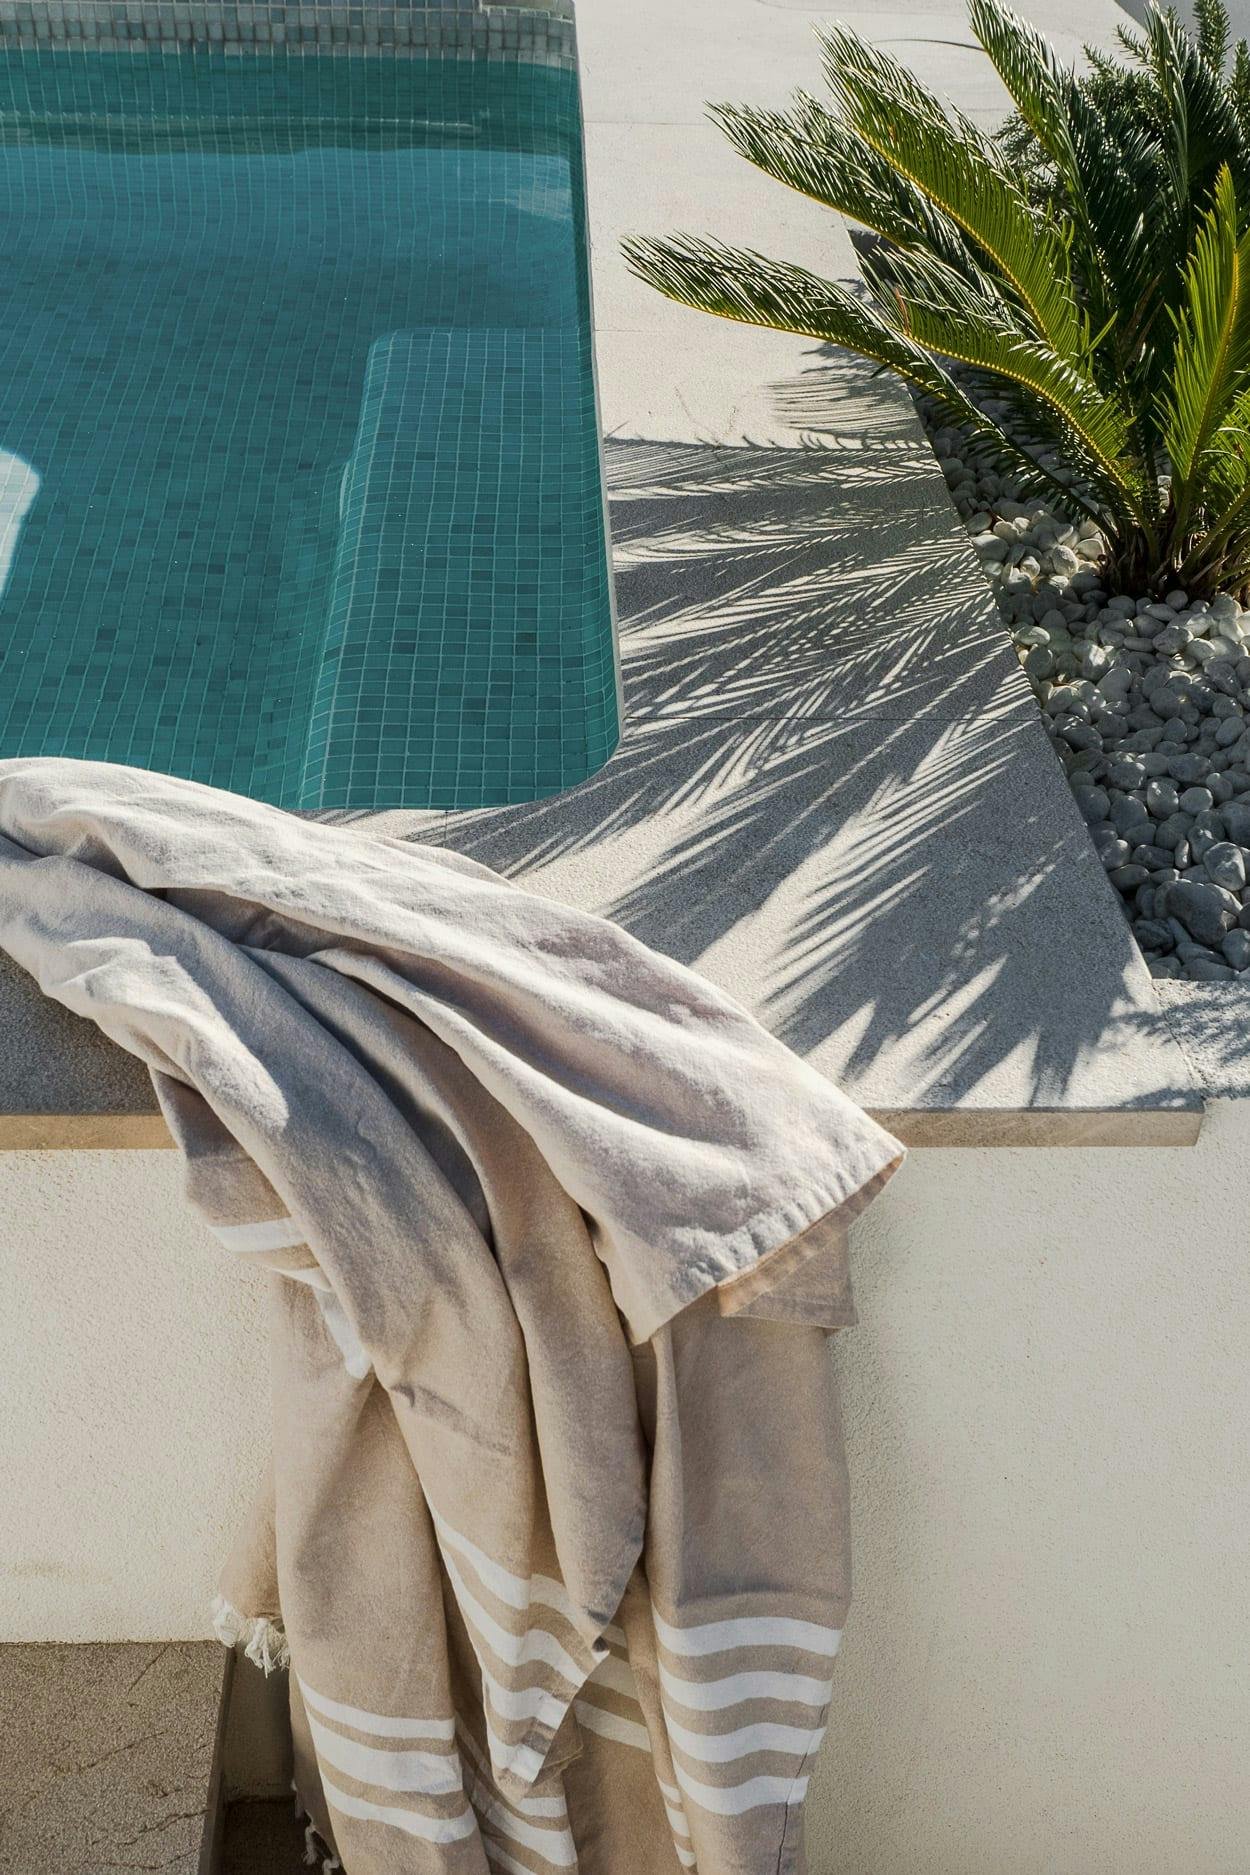 A white towel is hanging on a railing outside, near a pool, and a palm tree, creating a relaxing and inviting atmosphere.